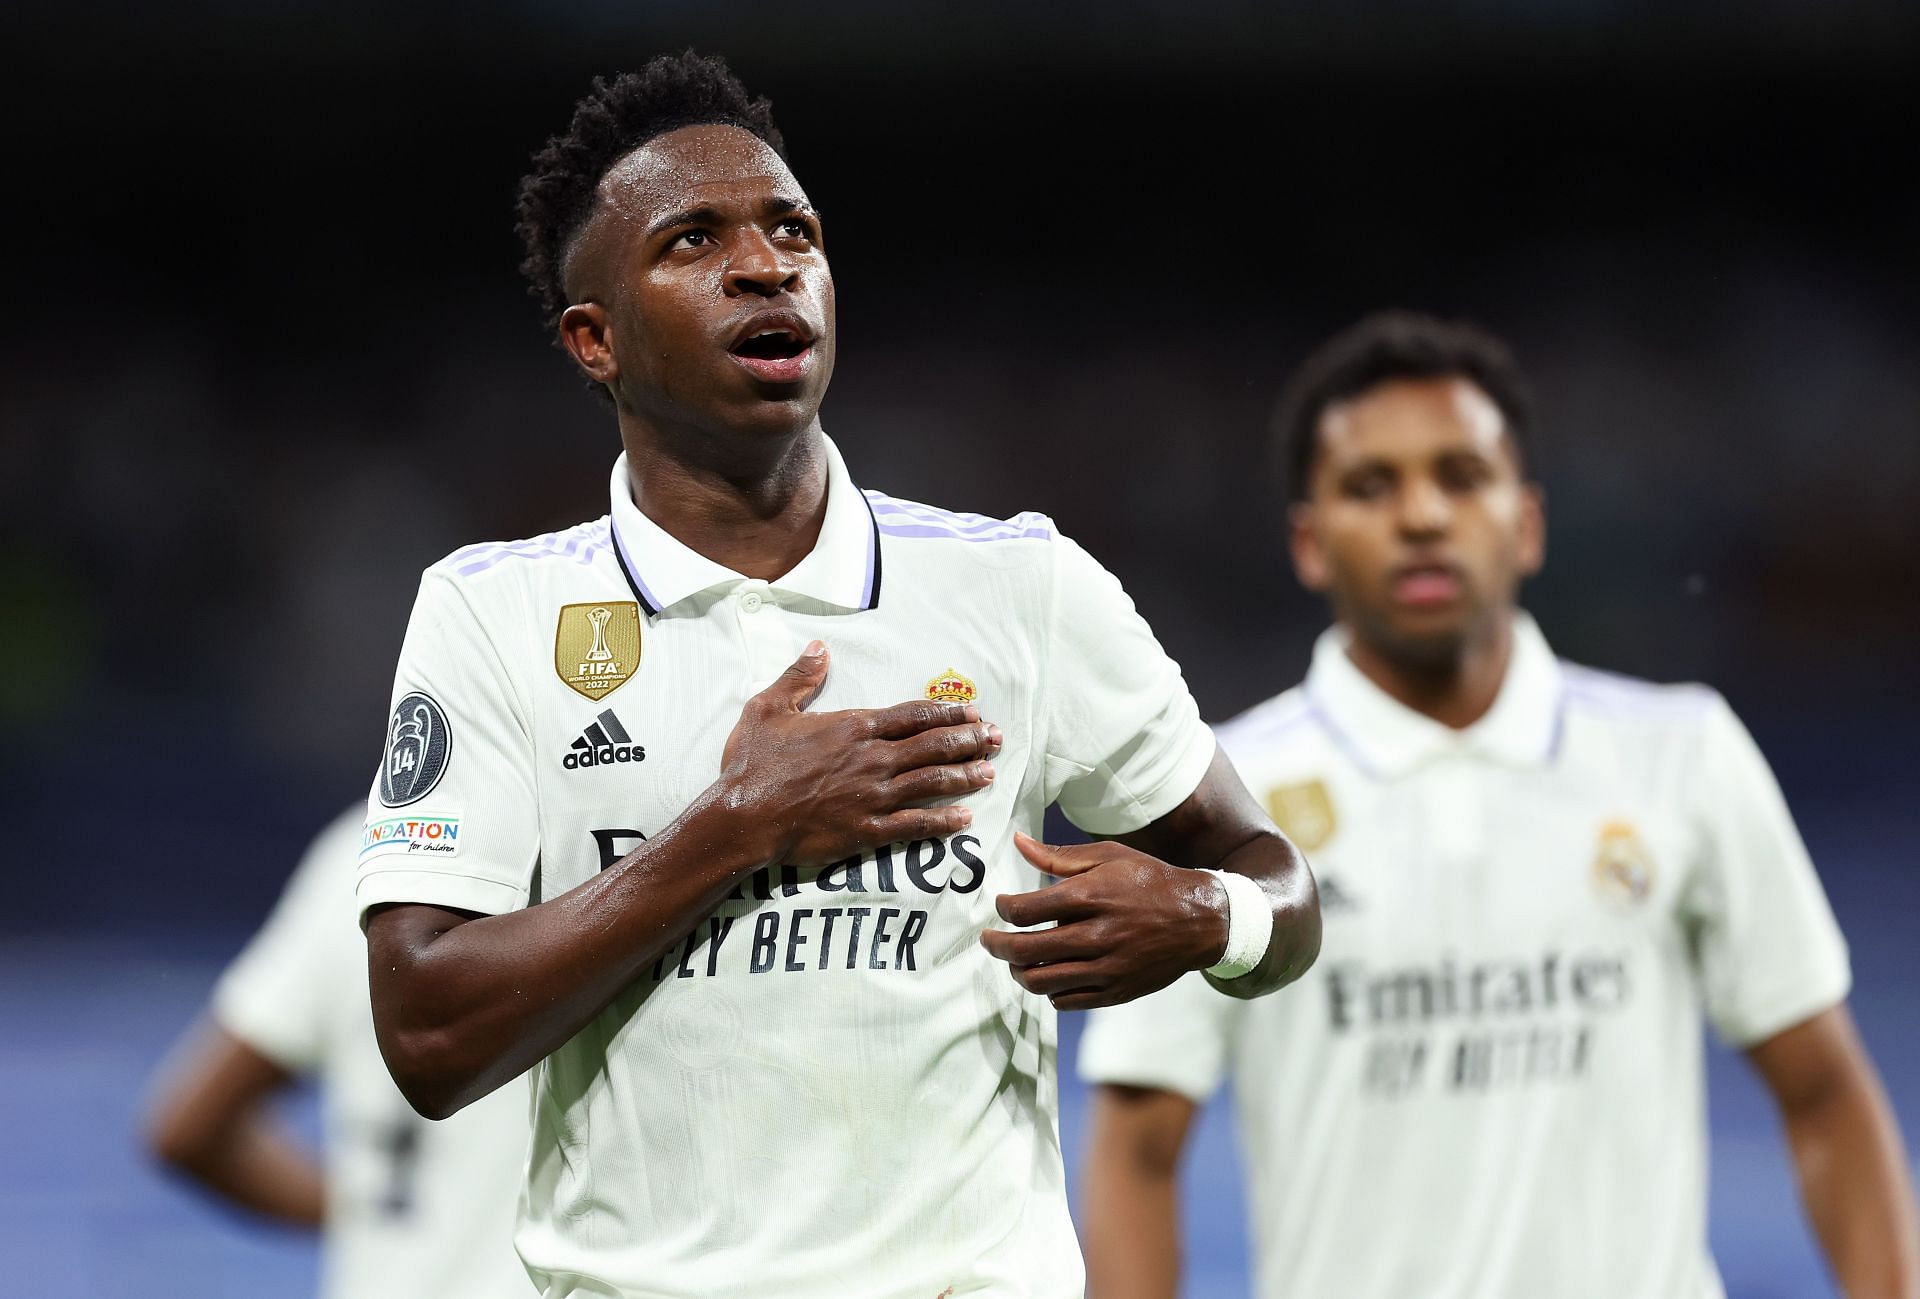 Vinicius Junior celebrates his goal vs. Manchester City FC in the first leg of the semi-final of the UEFA Champions League